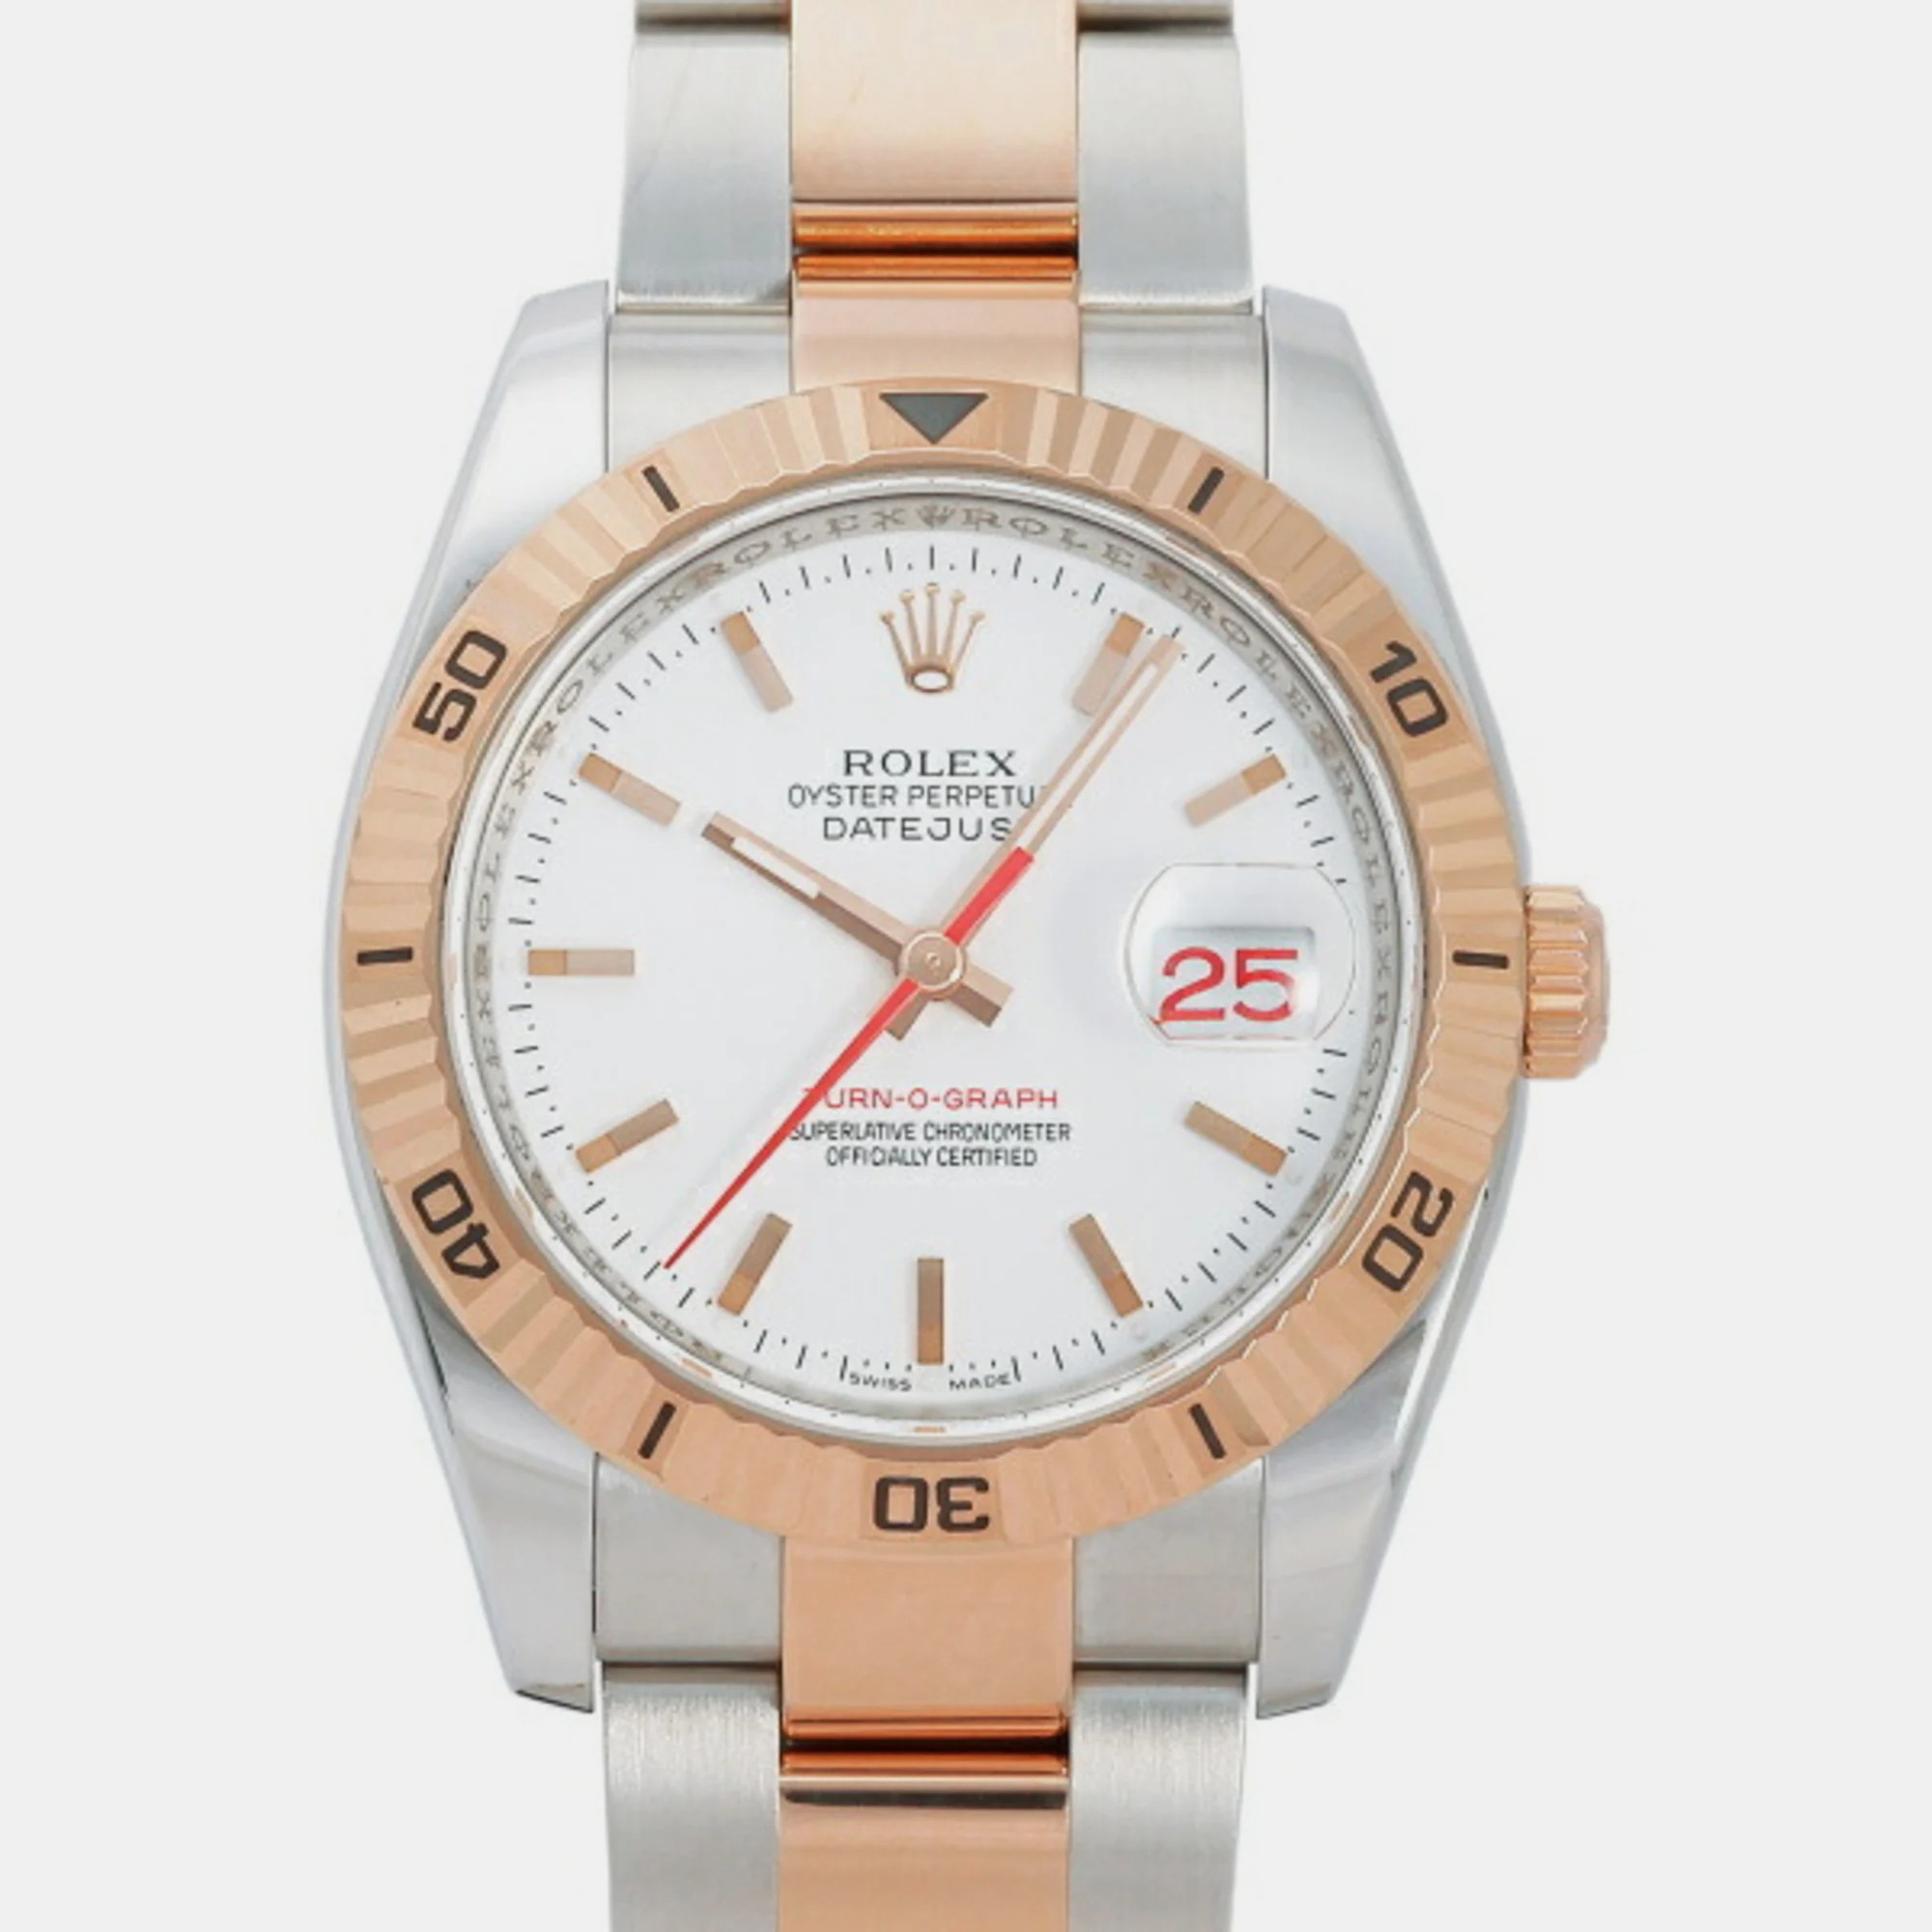 Rolex White 18k Rose Gold And Stainless Steel Datejust 116261 Automatic Men's Wristwatch 36 Mm